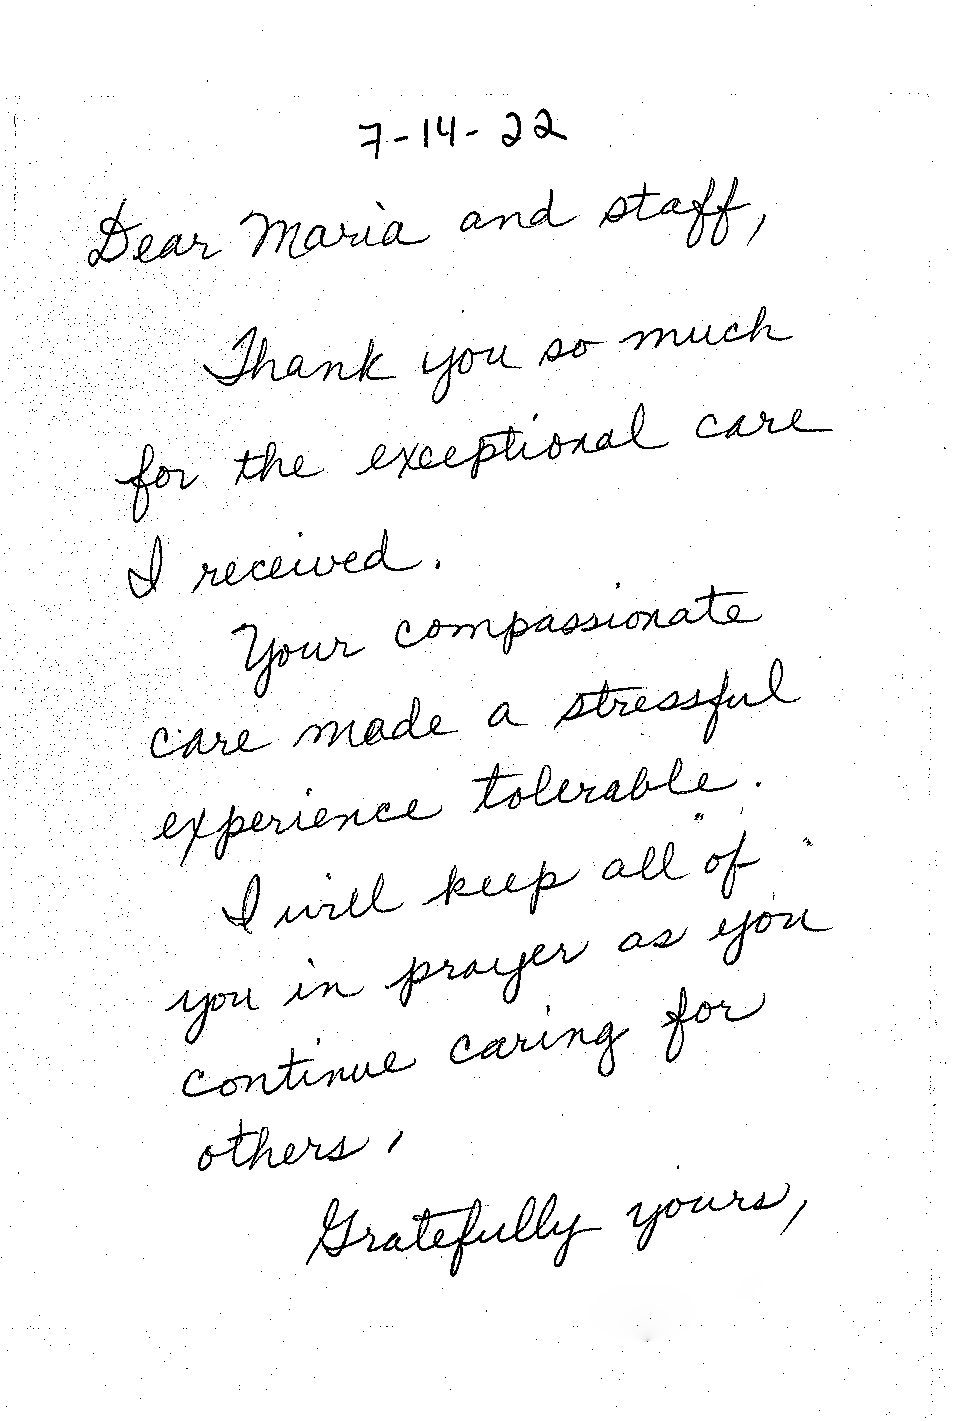 Note of thanks from patient